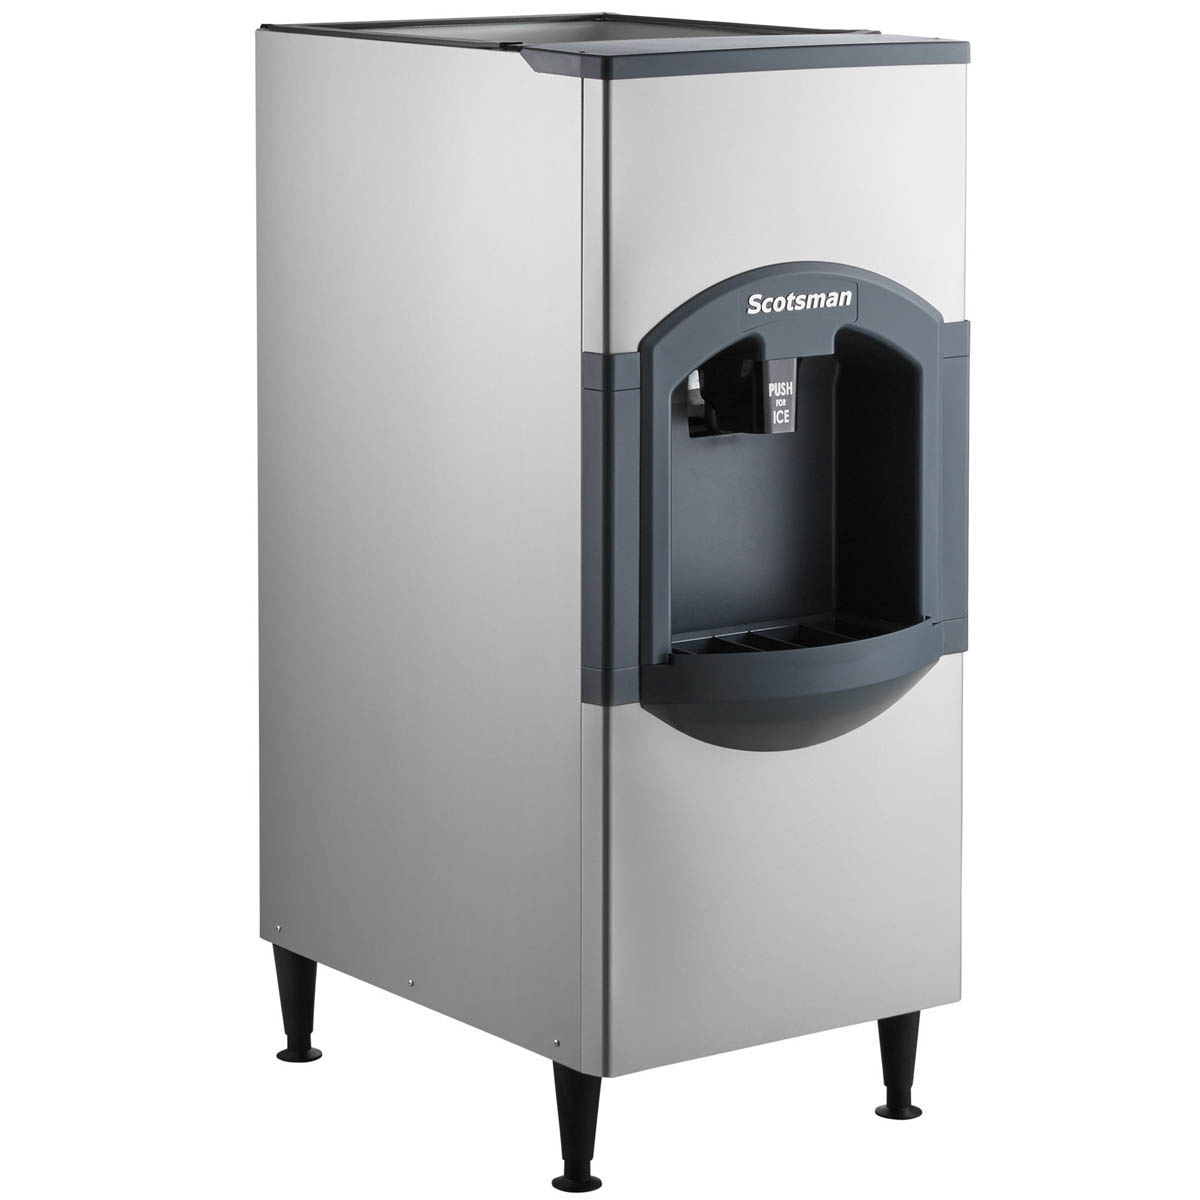 With Scotsman HD22B-1 Serving Up Ice For Your Customers, Chef's Deal